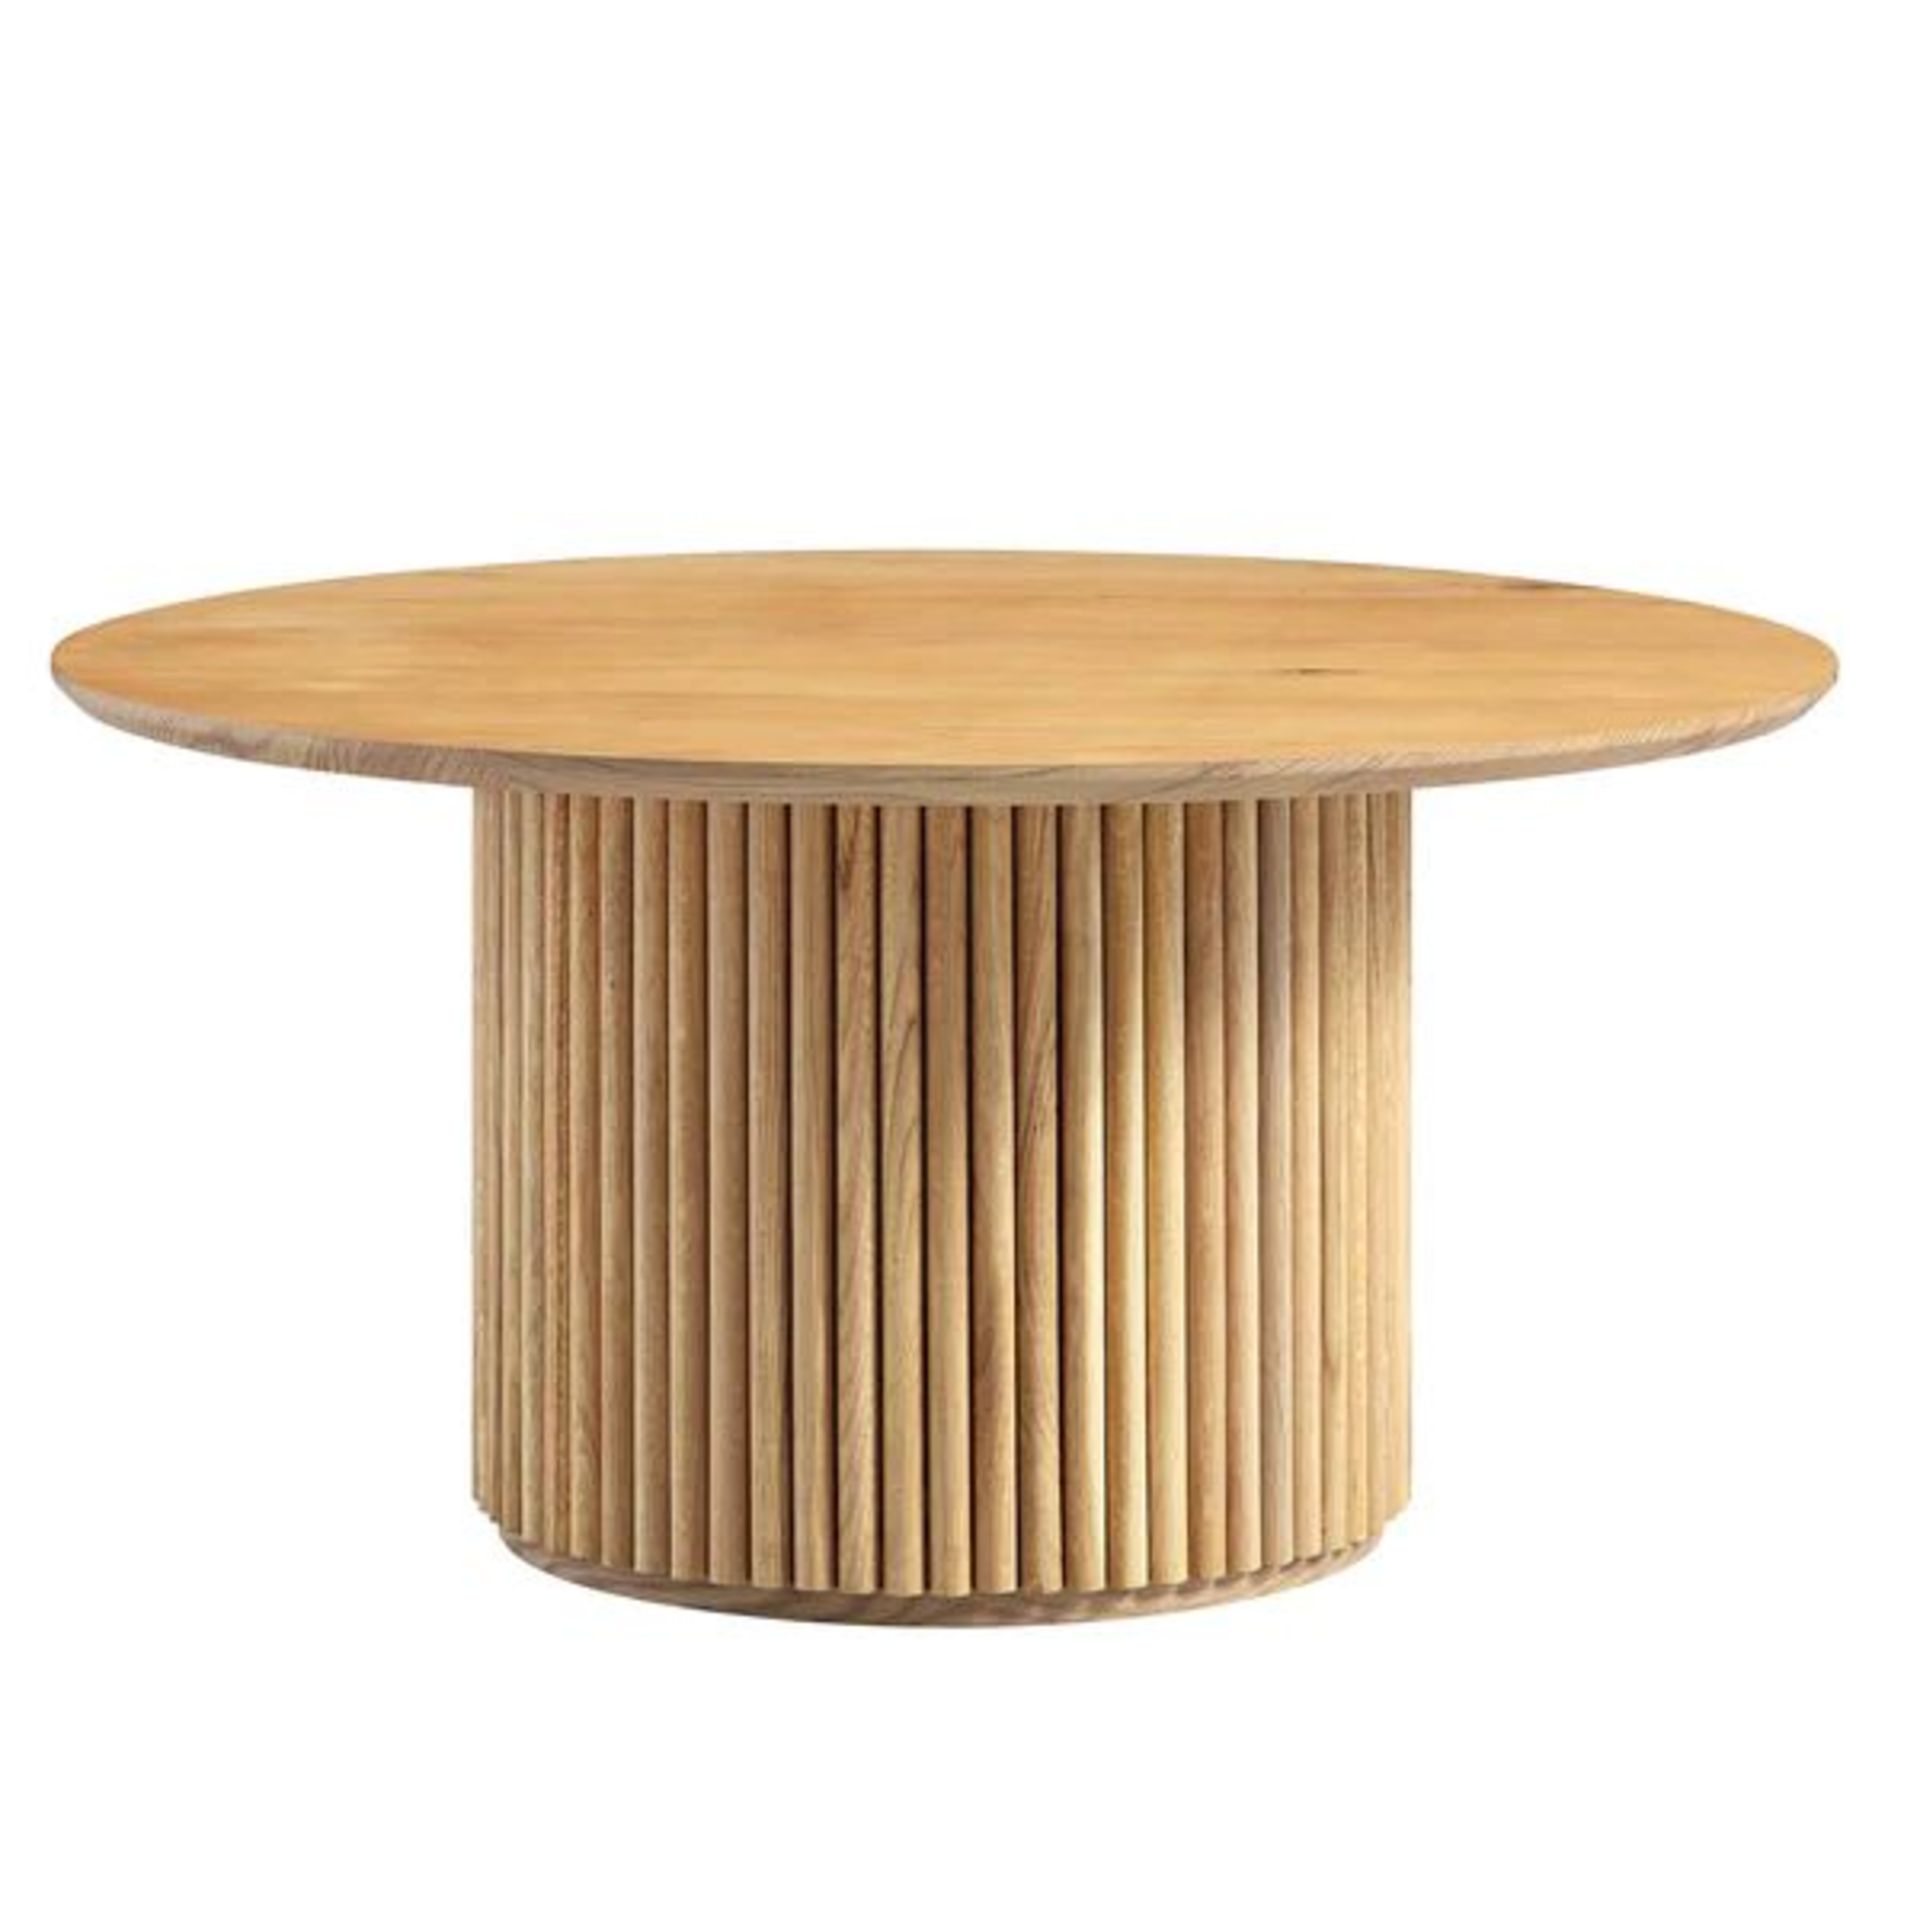 Maru Round Oak Pedestal Coffee Table, Oak. - ER30. RRP £249.99. Meet the new addition to our Maru - Image 2 of 2